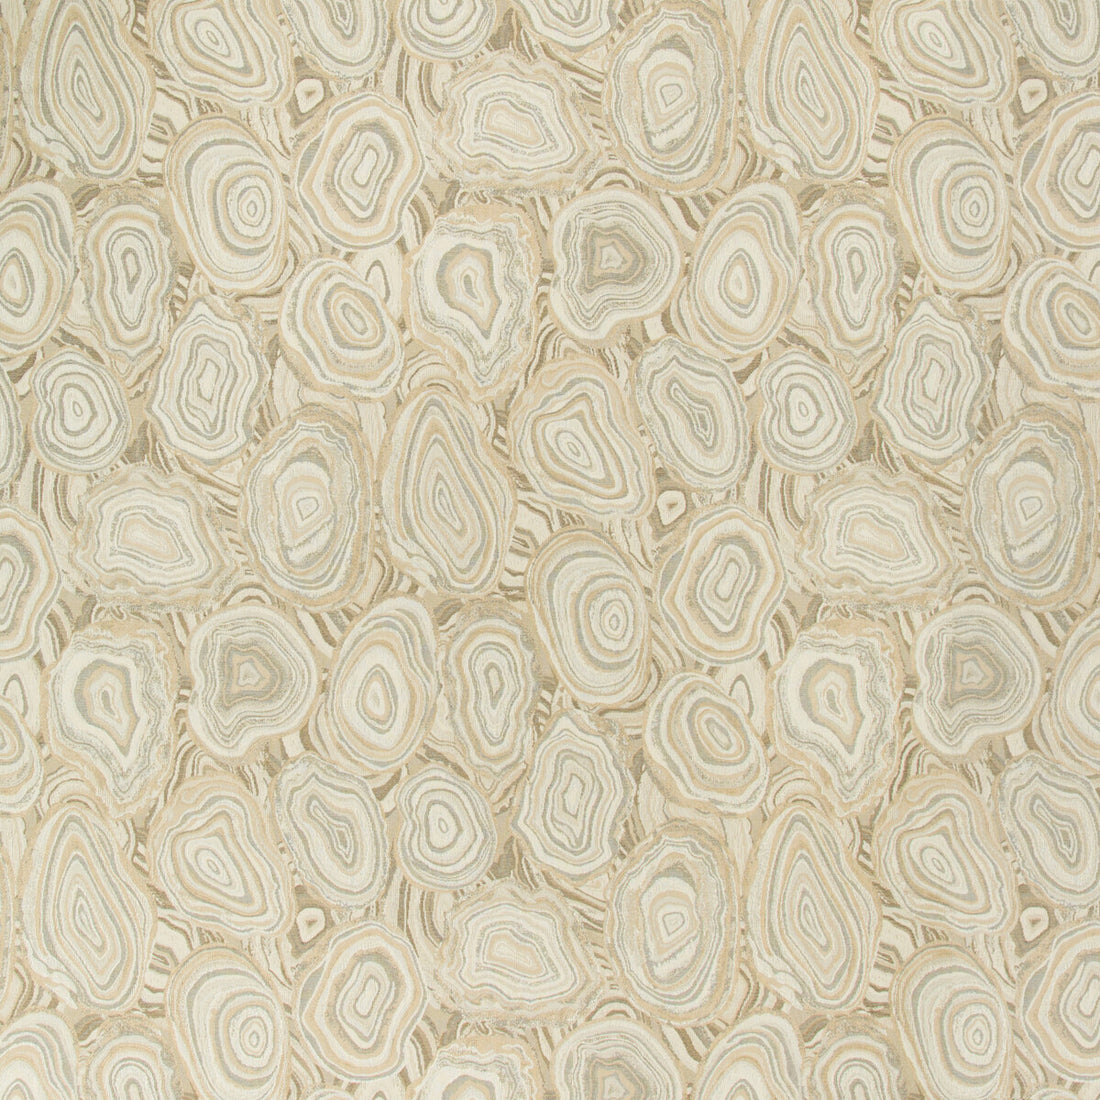 Kravet Design fabric in 34707-106 color - pattern 34707.106.0 - by Kravet Design in the Performance Crypton Home collection